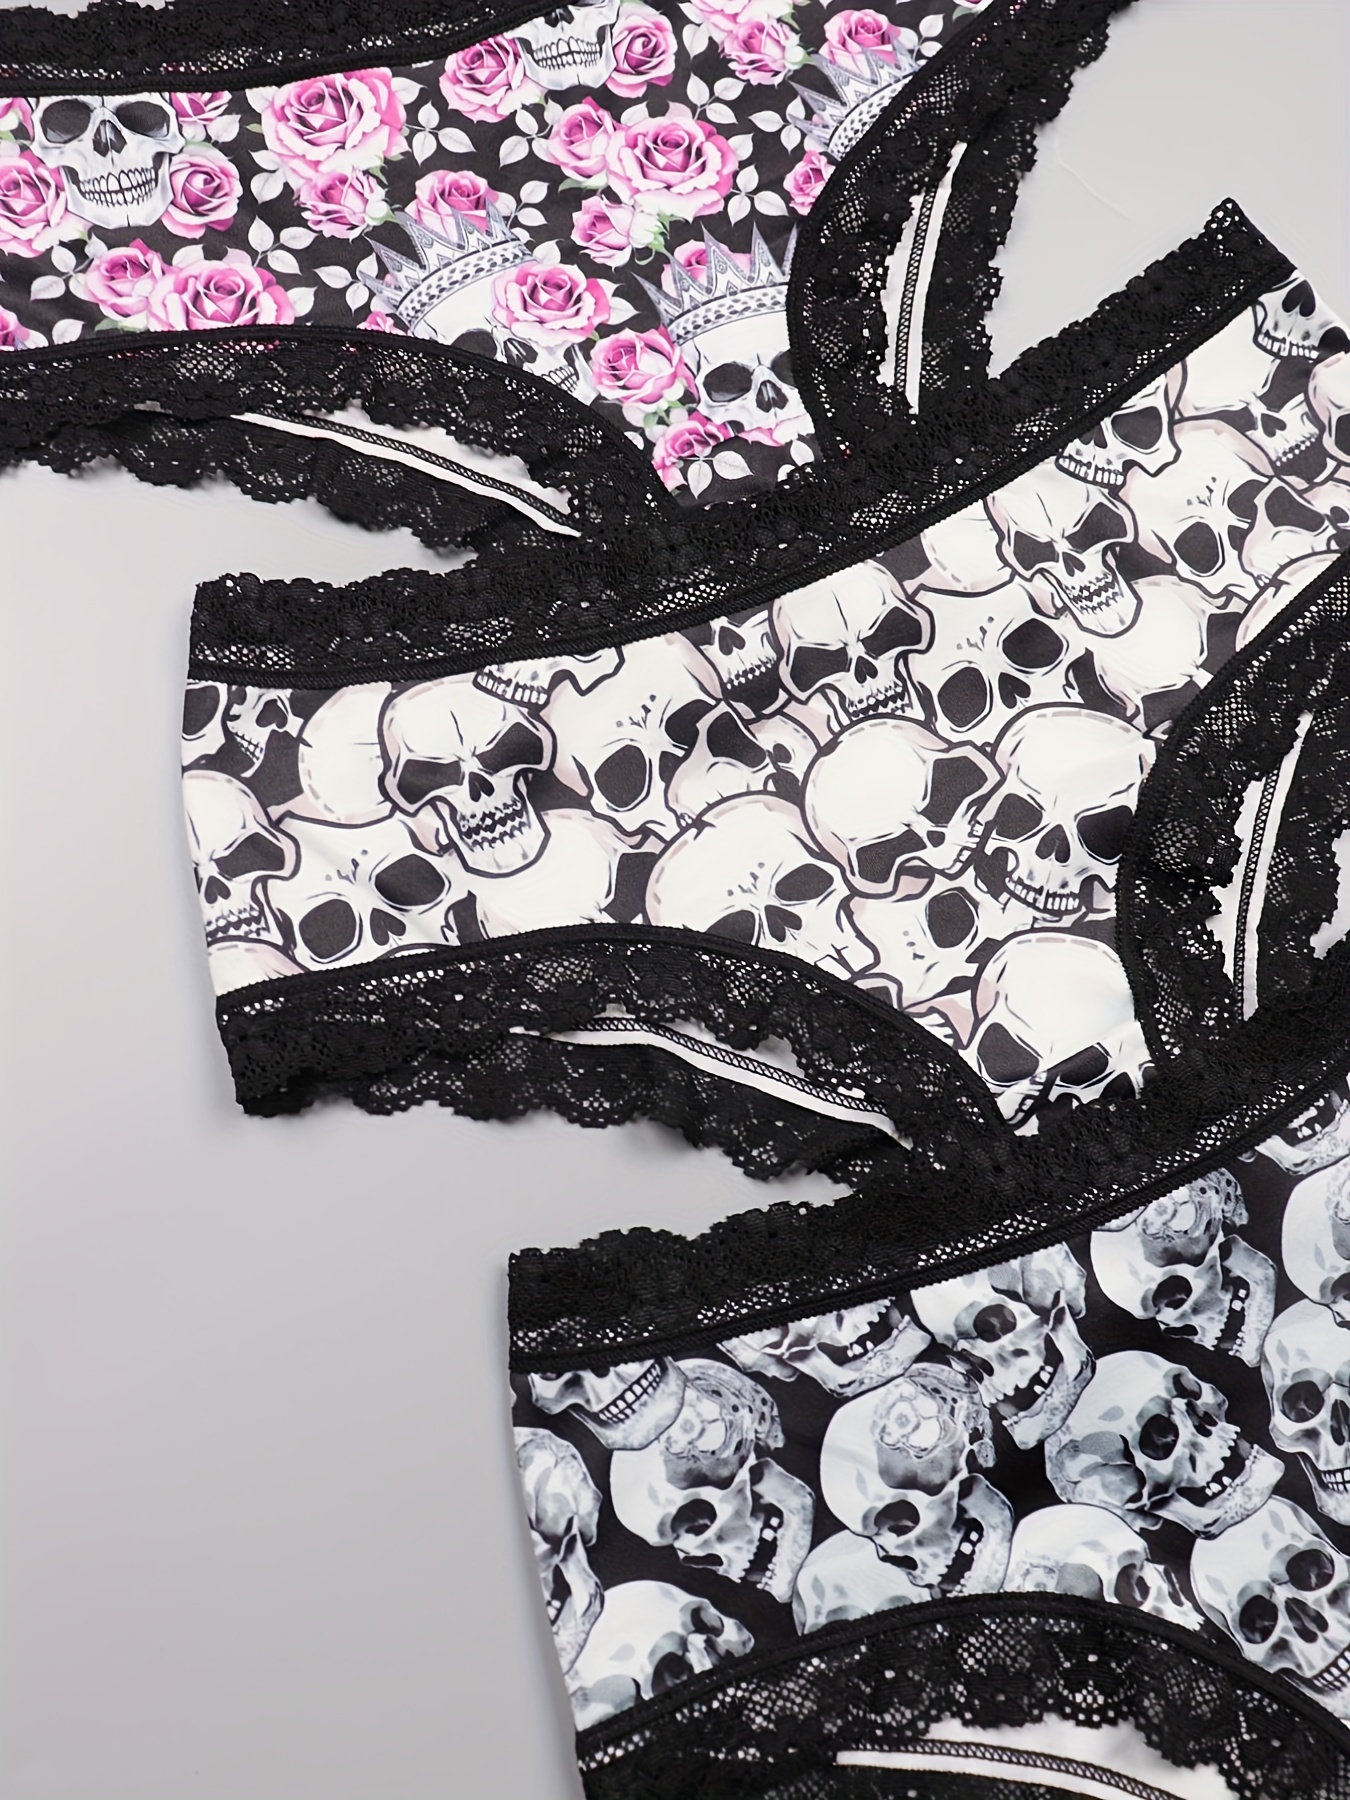 ROMWE Goth 3pcs/Set Women'S Spider Skull Head Printed Floral Lace Trim  Thong Underwear